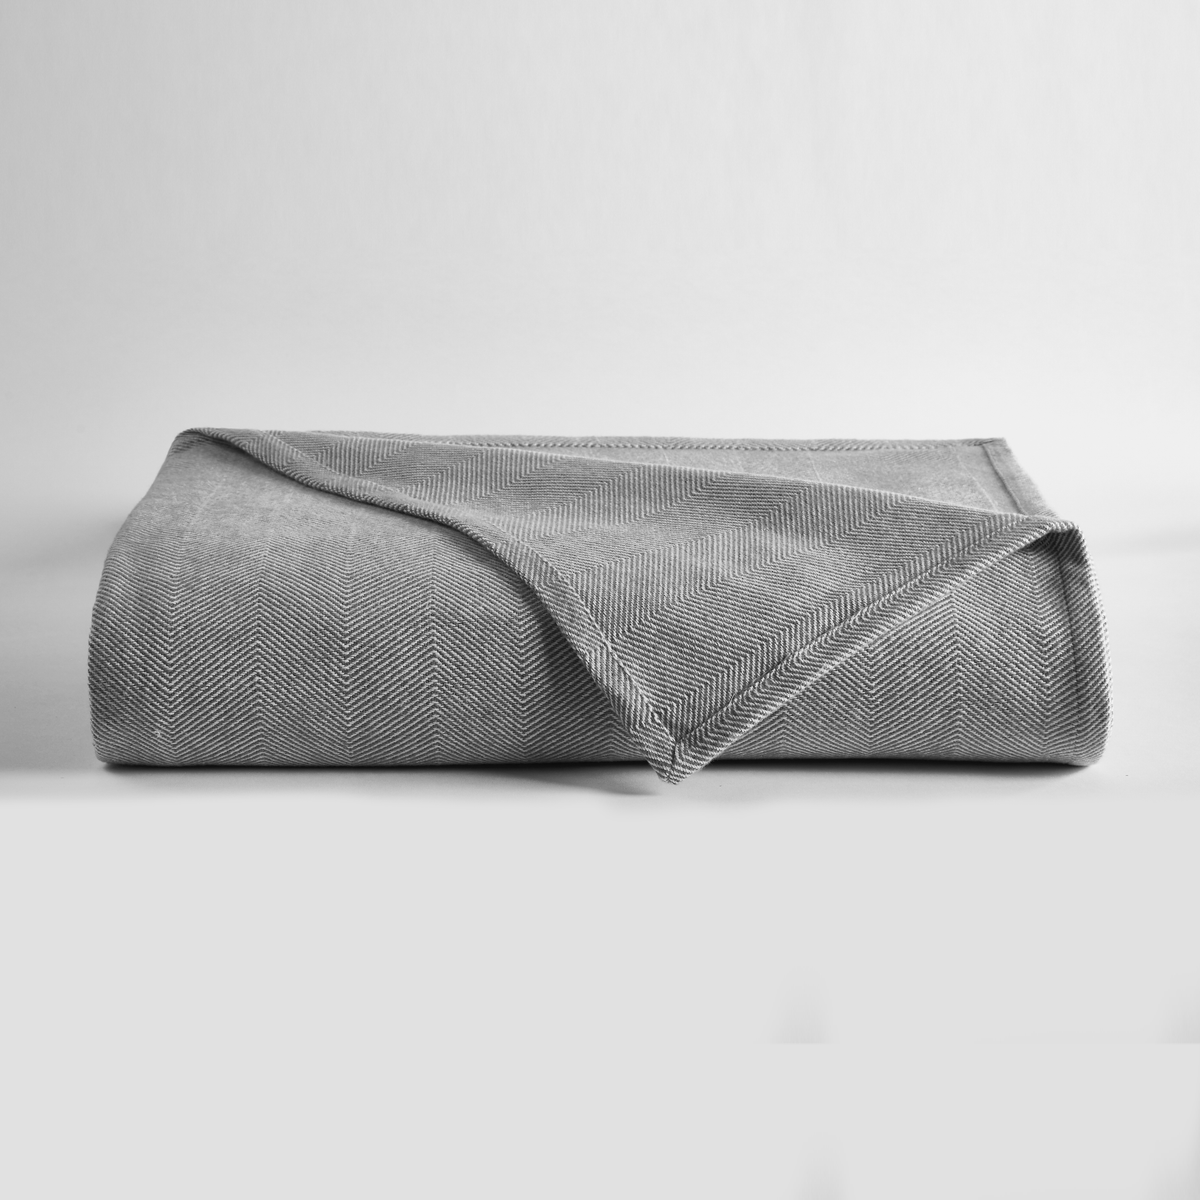 Clear Image of Downtown Company Herringbone Blanket Charcoal in Gray White Color